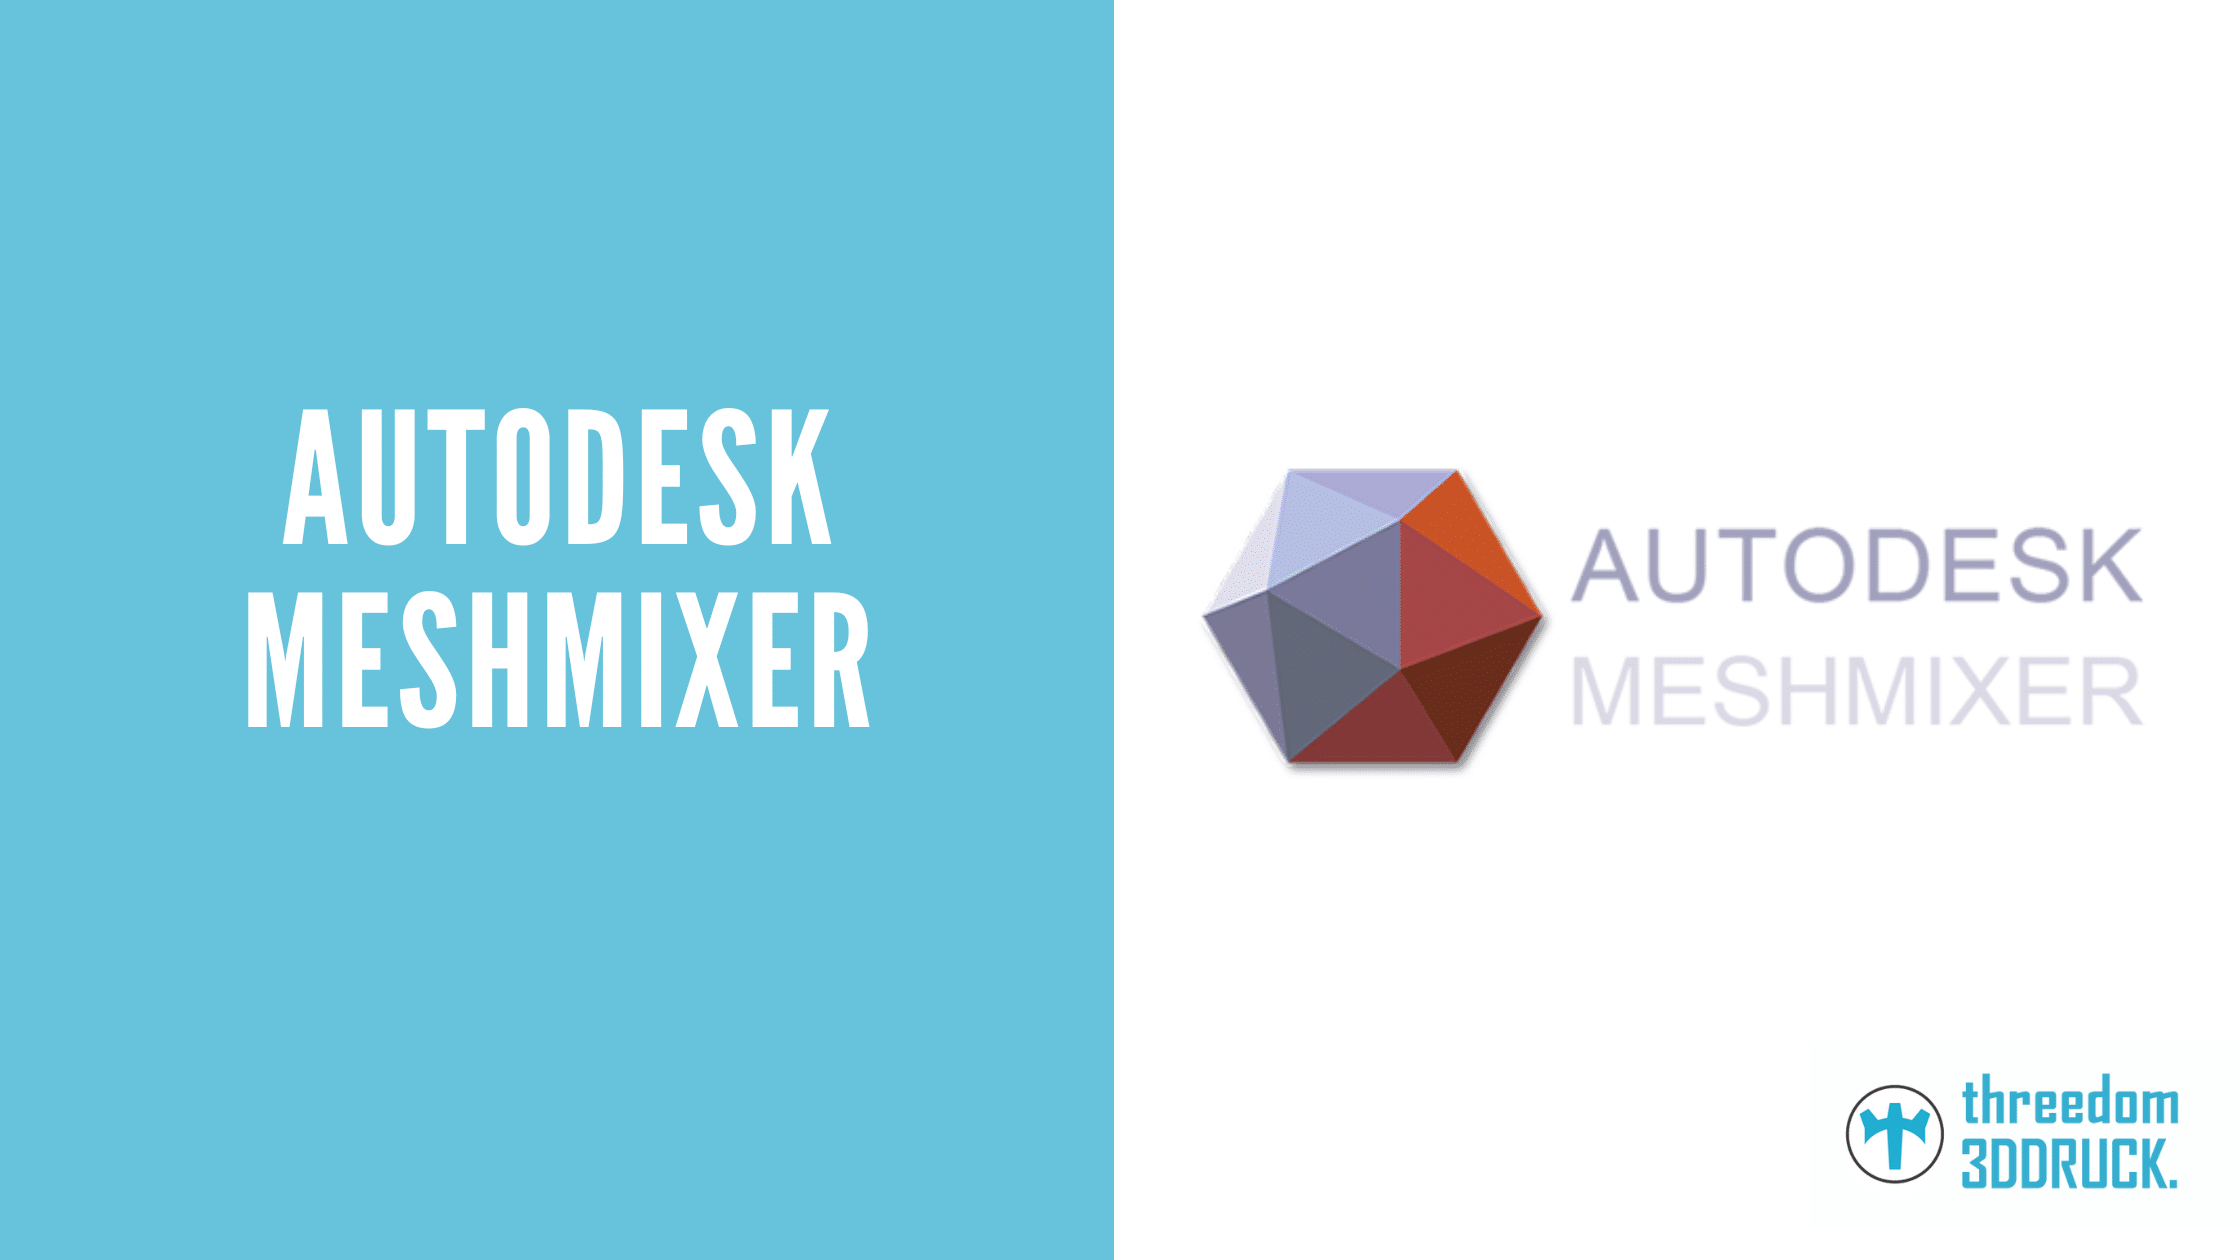 Meshmixer: definition, functionality and scope